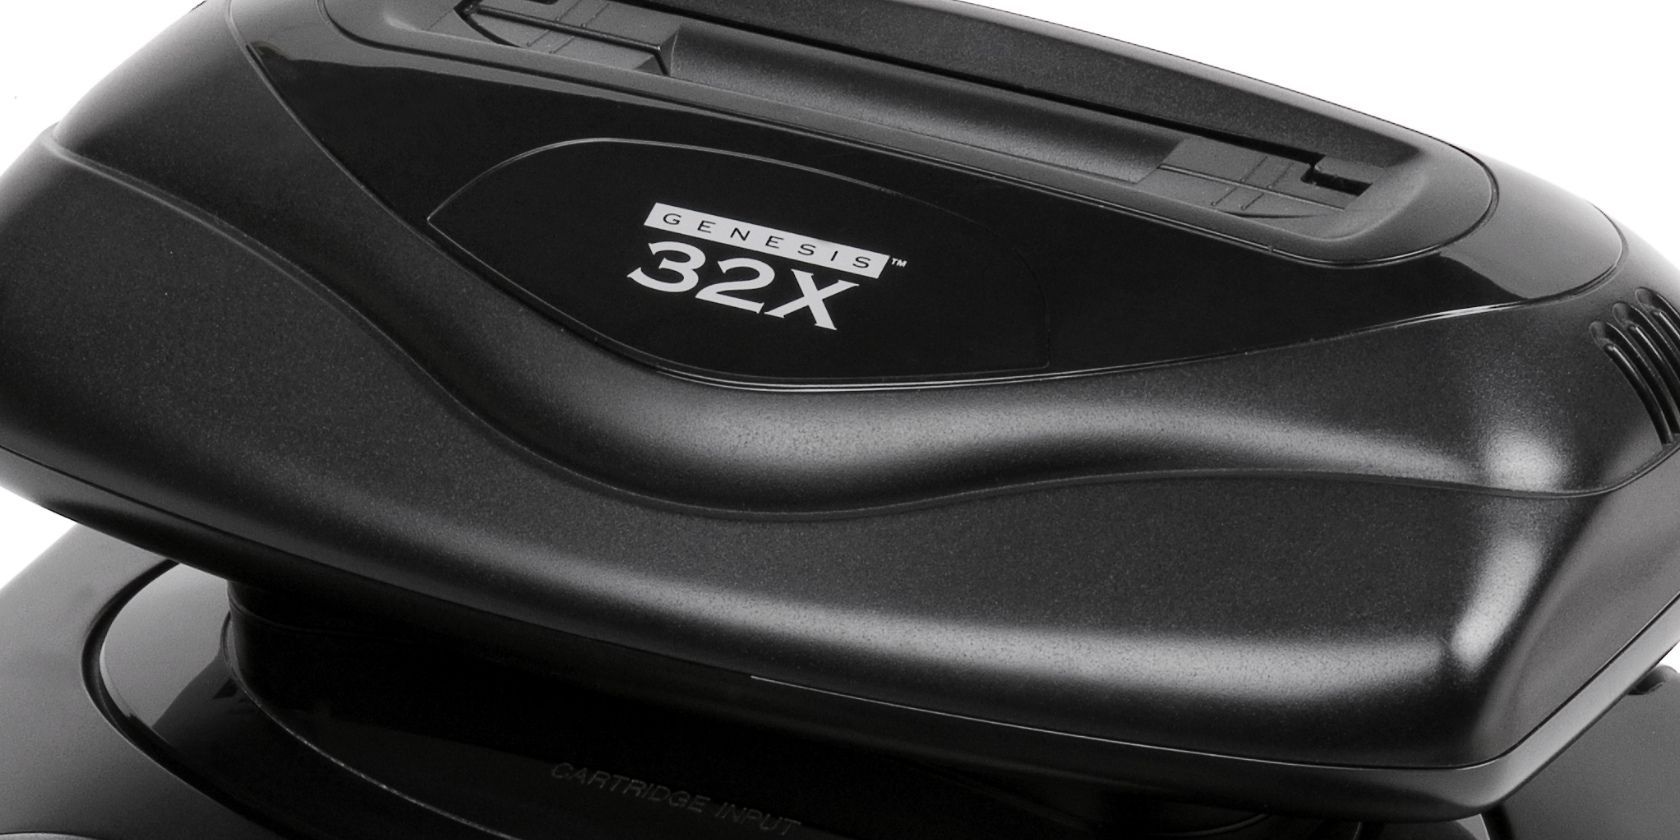 A close-up of the Sega 32X video game console add-on.